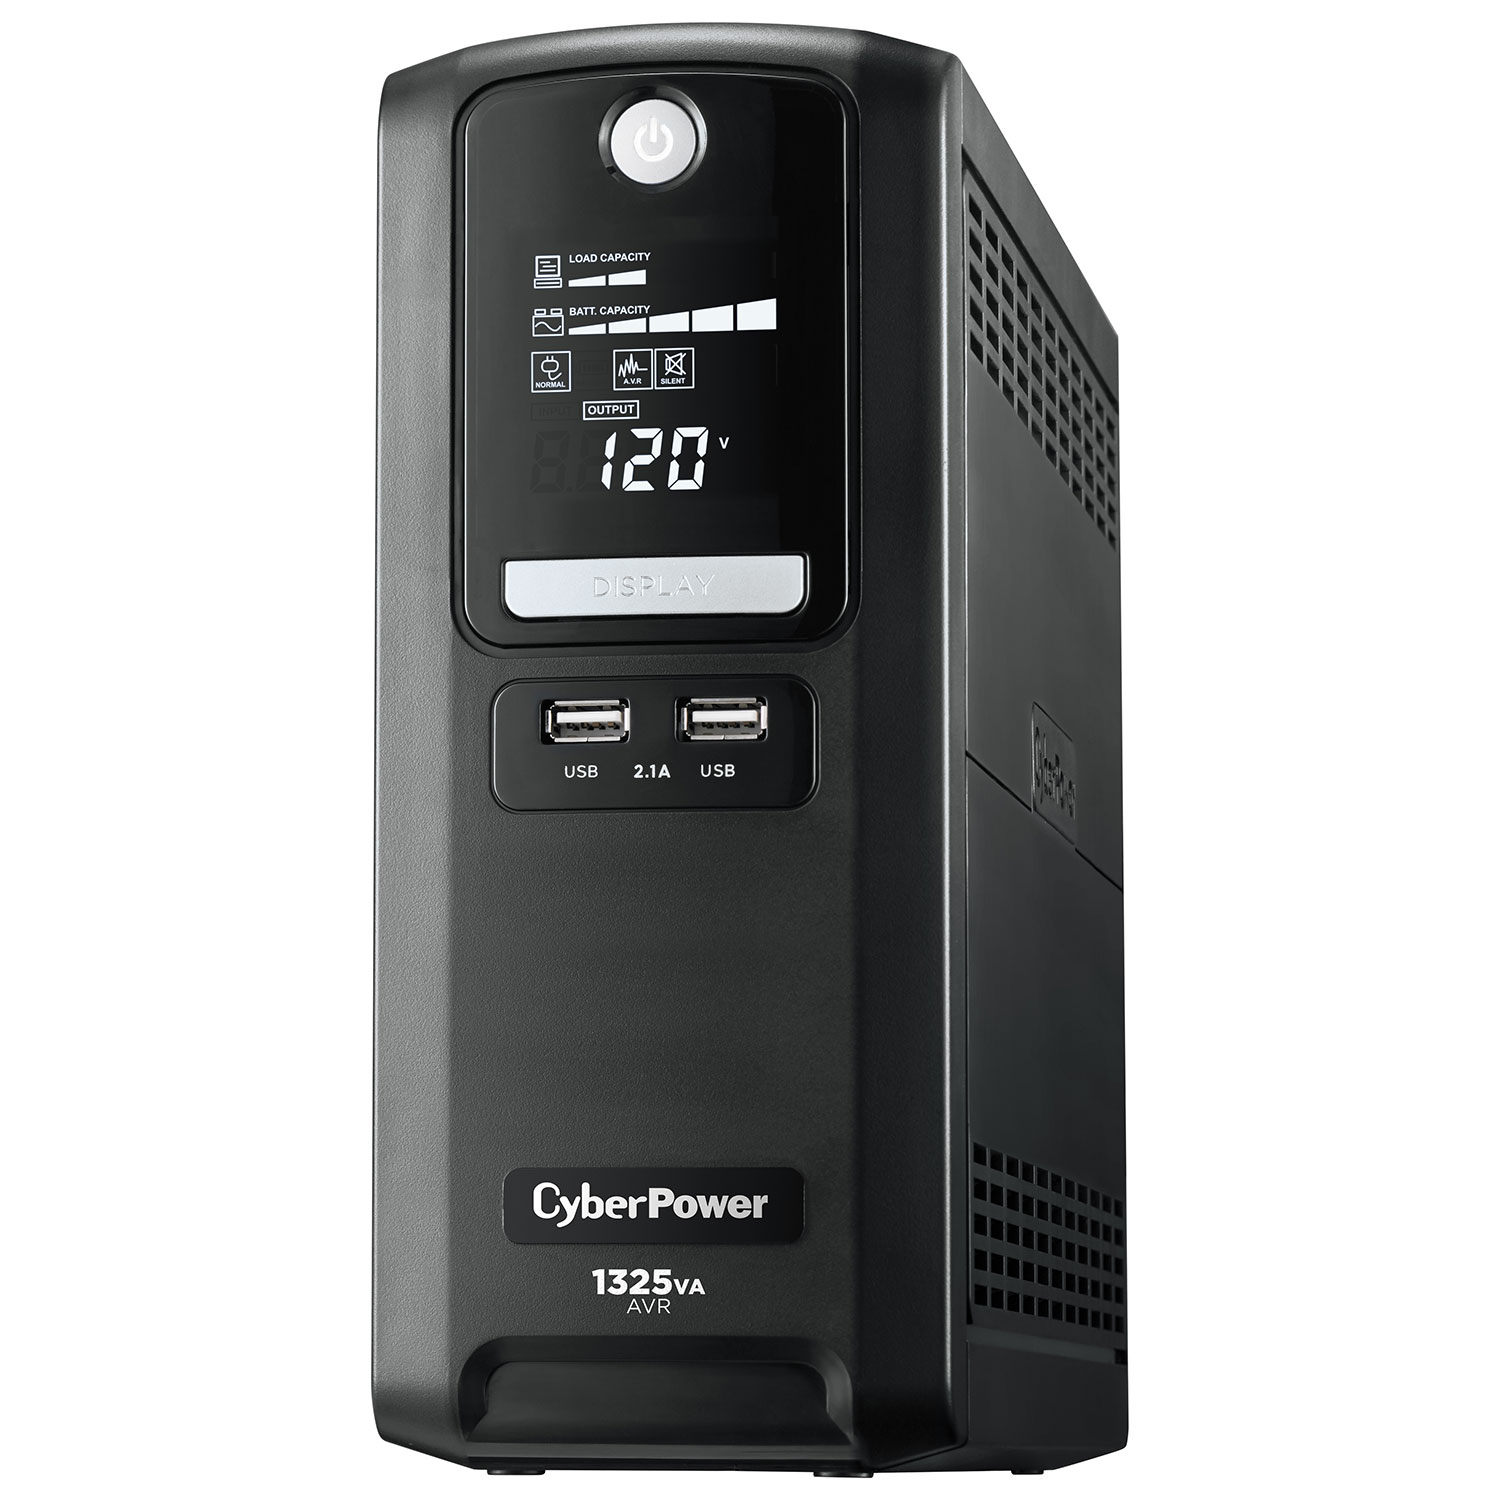 CyberPower 1325VA 10-Outlet UPS Battery Back-Up (LX1325GU-FC)